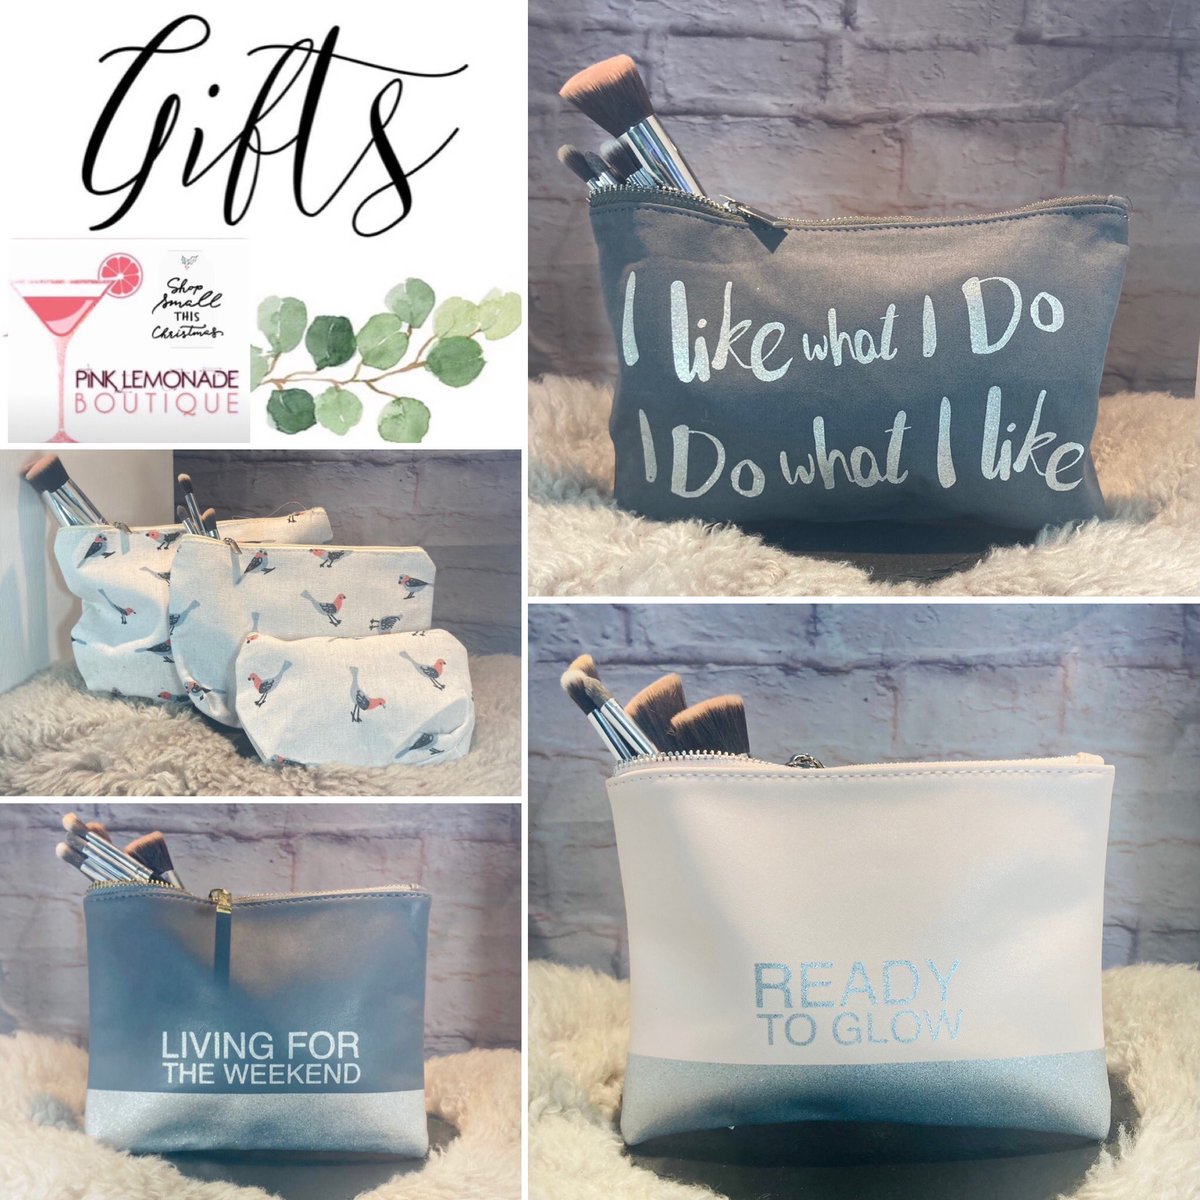 #UKGiftAM

💕Looking for gift inspiration…..our cosmetic bags make a perfect gift💕

pinklemonadeboutiqueuk.com

#christmasgiftideas #giftideas #gifts #cosmetics #cosmeticsbag #giftsforher #shopsmallbusiness